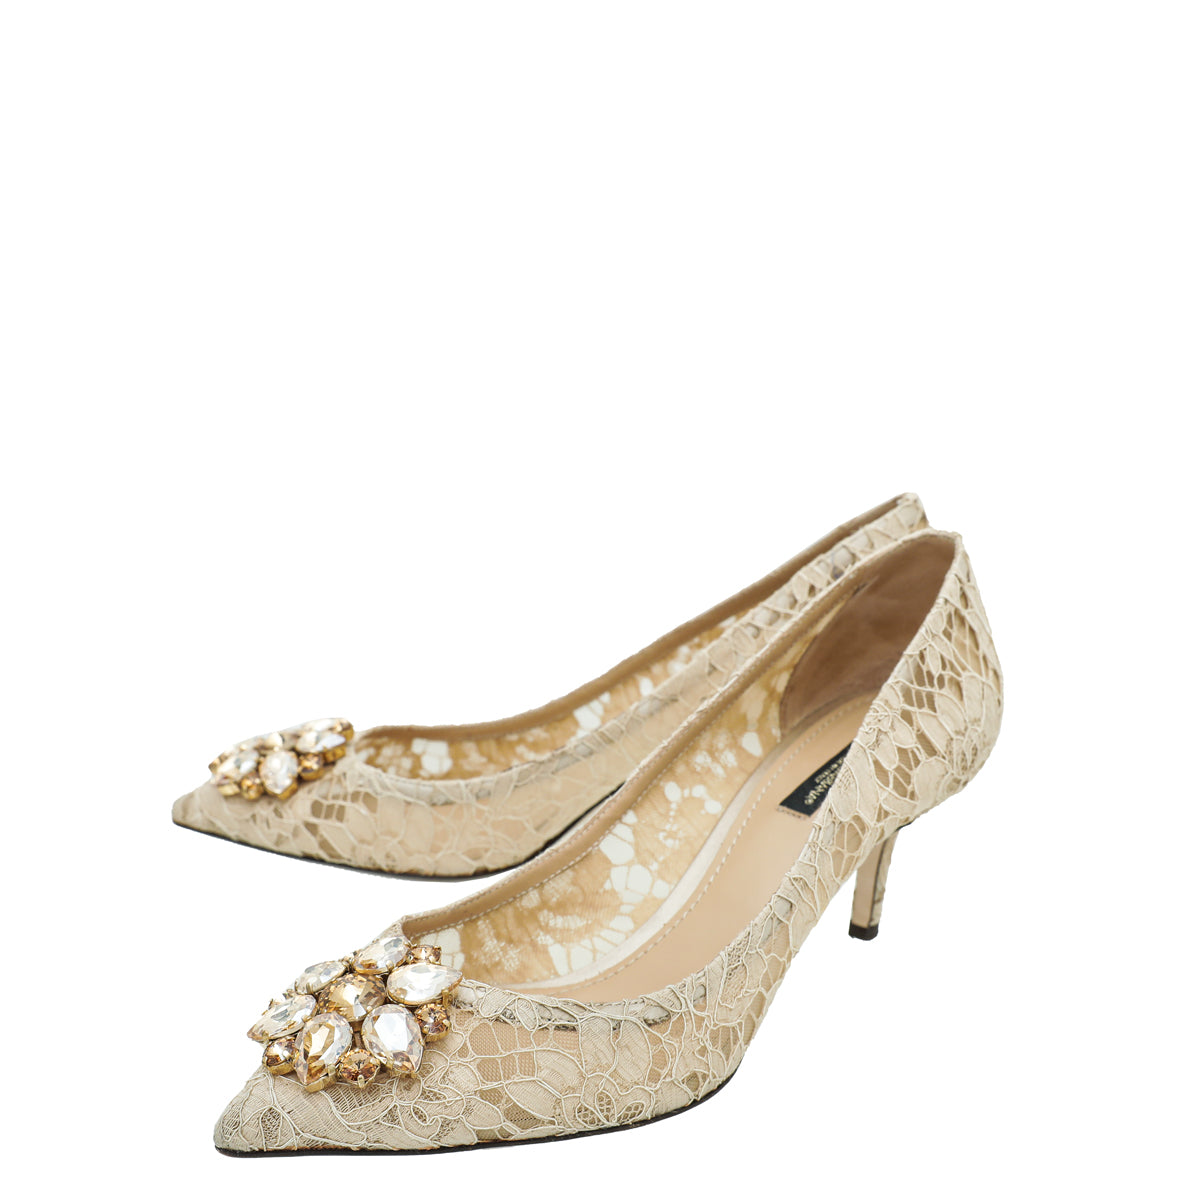 Dolce & Gabbana Nude Lace Bellucci Crystal Lace Pumps 39.5